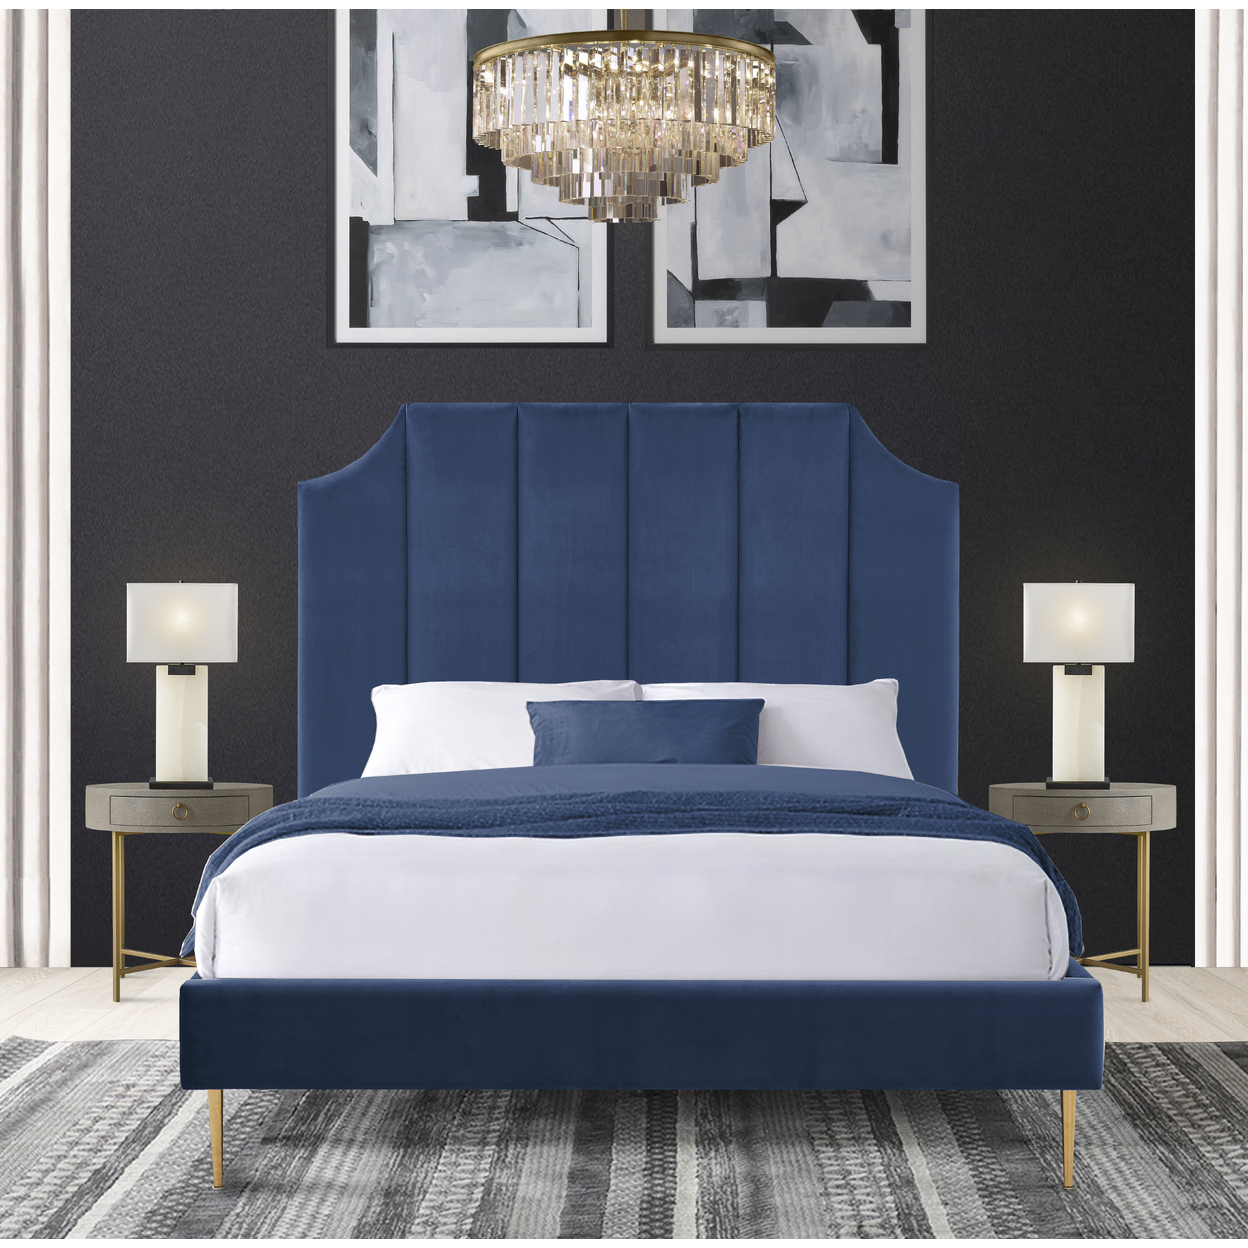 Iconic Home Evian Platform Bed Frame With Headboard Velvet Upholstered Vertical Channel Quilted, Modern Contemporary - Navy, King